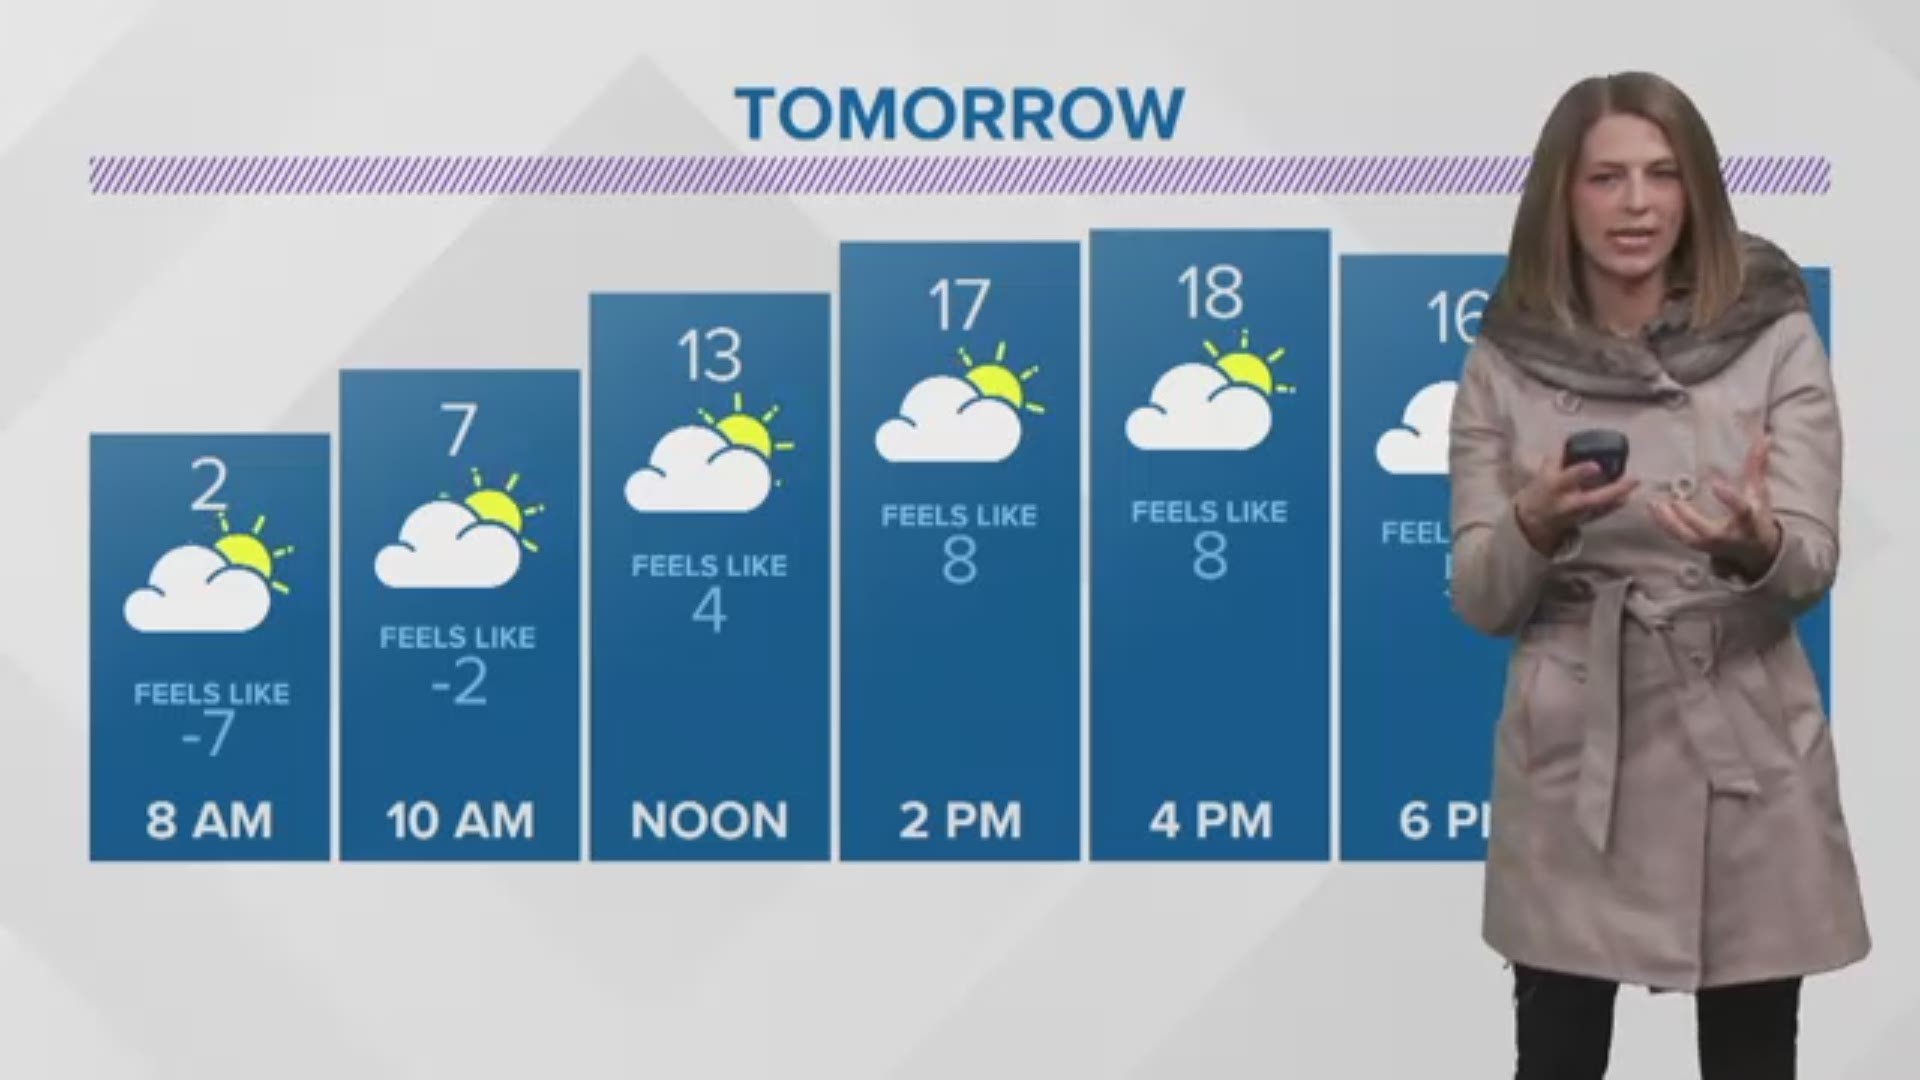 Laura gives her forecast on Friday, February 15, 2019.